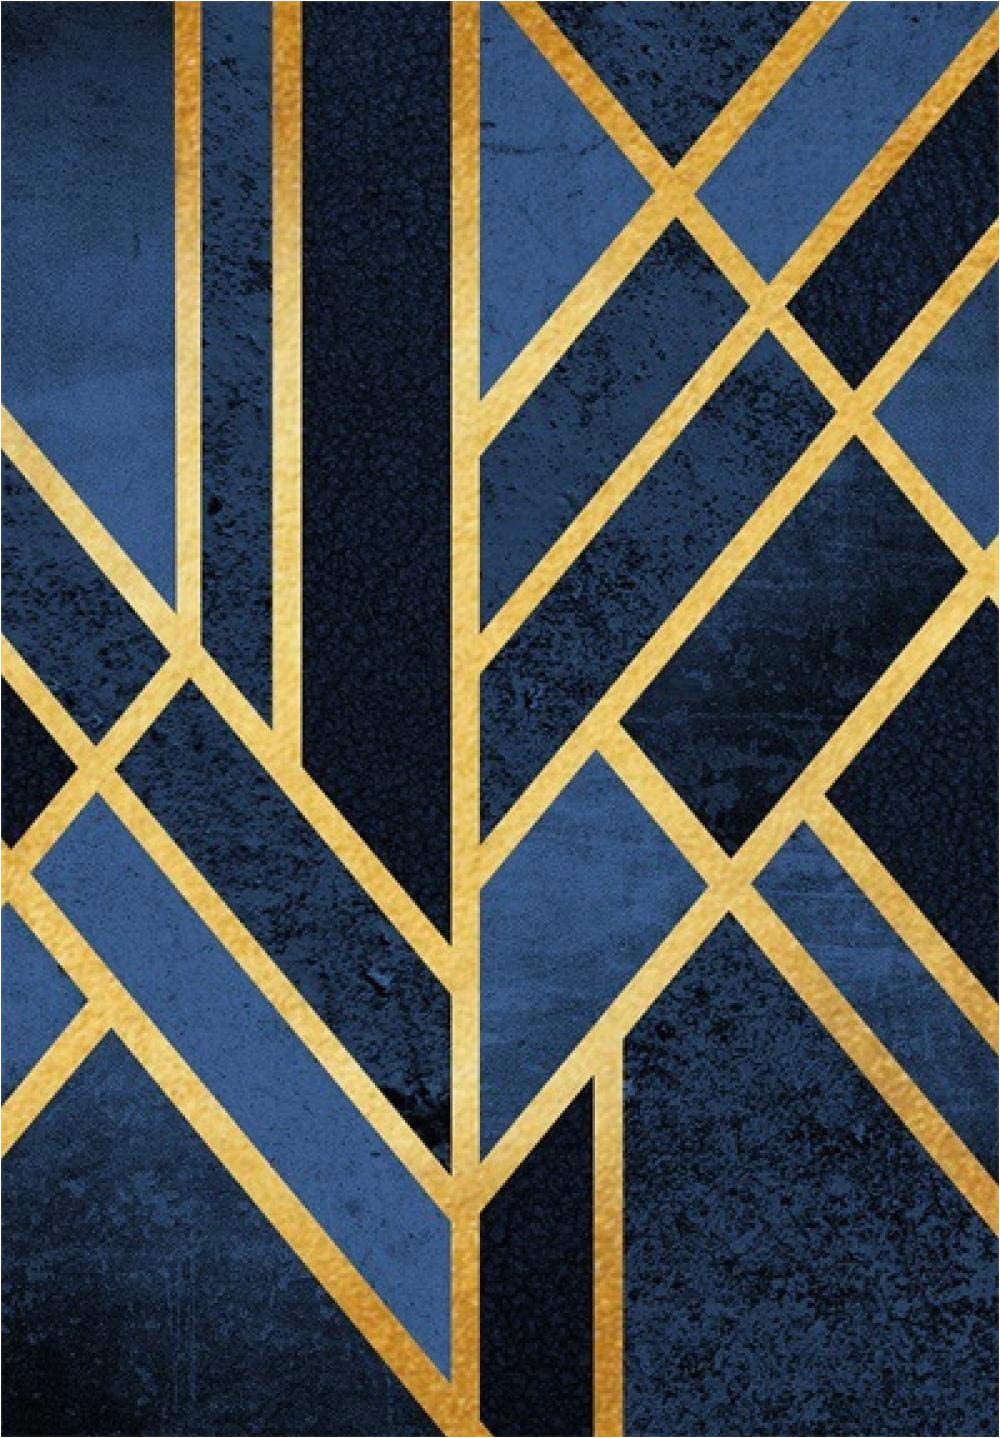 Navy Blue Gold Rug Cmwardrobe Rugs Modern Carpet Traditional for Living Room Bedroom Traditional Geometric Art Navy Blue Black Gold soft touch Non Slip Xxl Extra Large